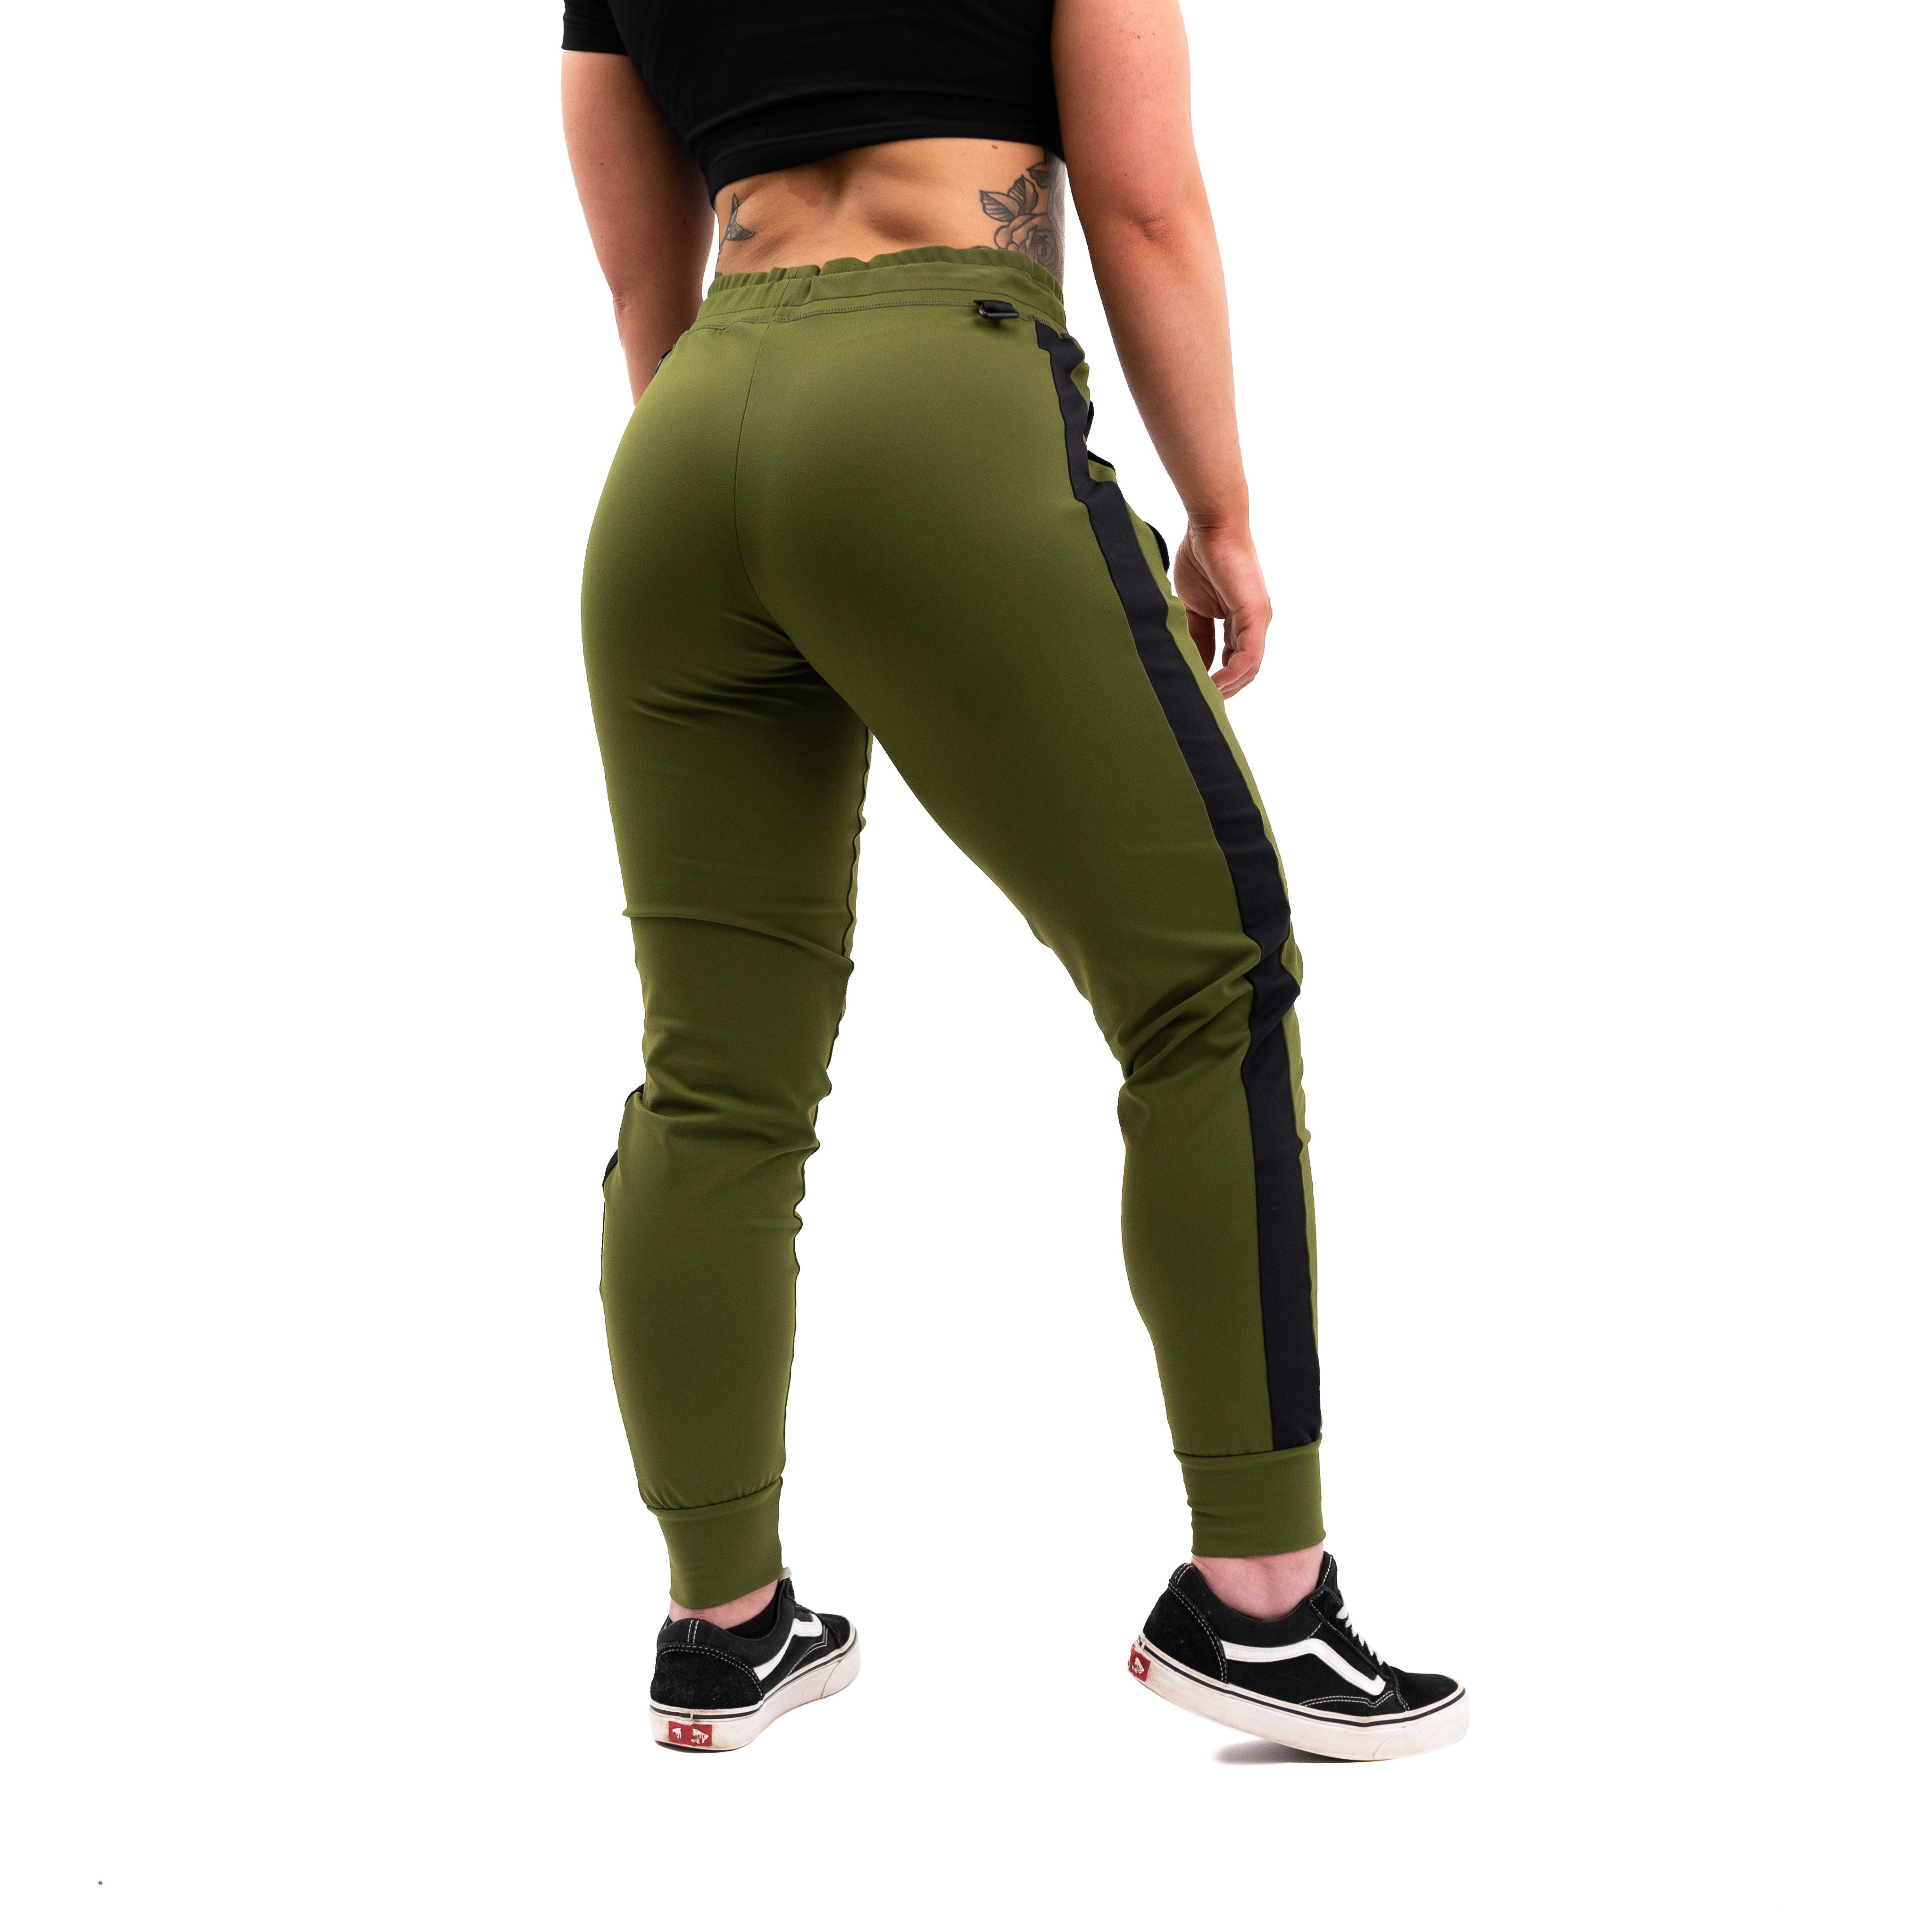 Military Defy joggers are just as comfortable in the gym as they are going out. These are made with premium moisture-wicking 4-way-stretch material for greater range of motion. These are a great fit for both men and women and offer deep zippered pockets and tapered leg design.